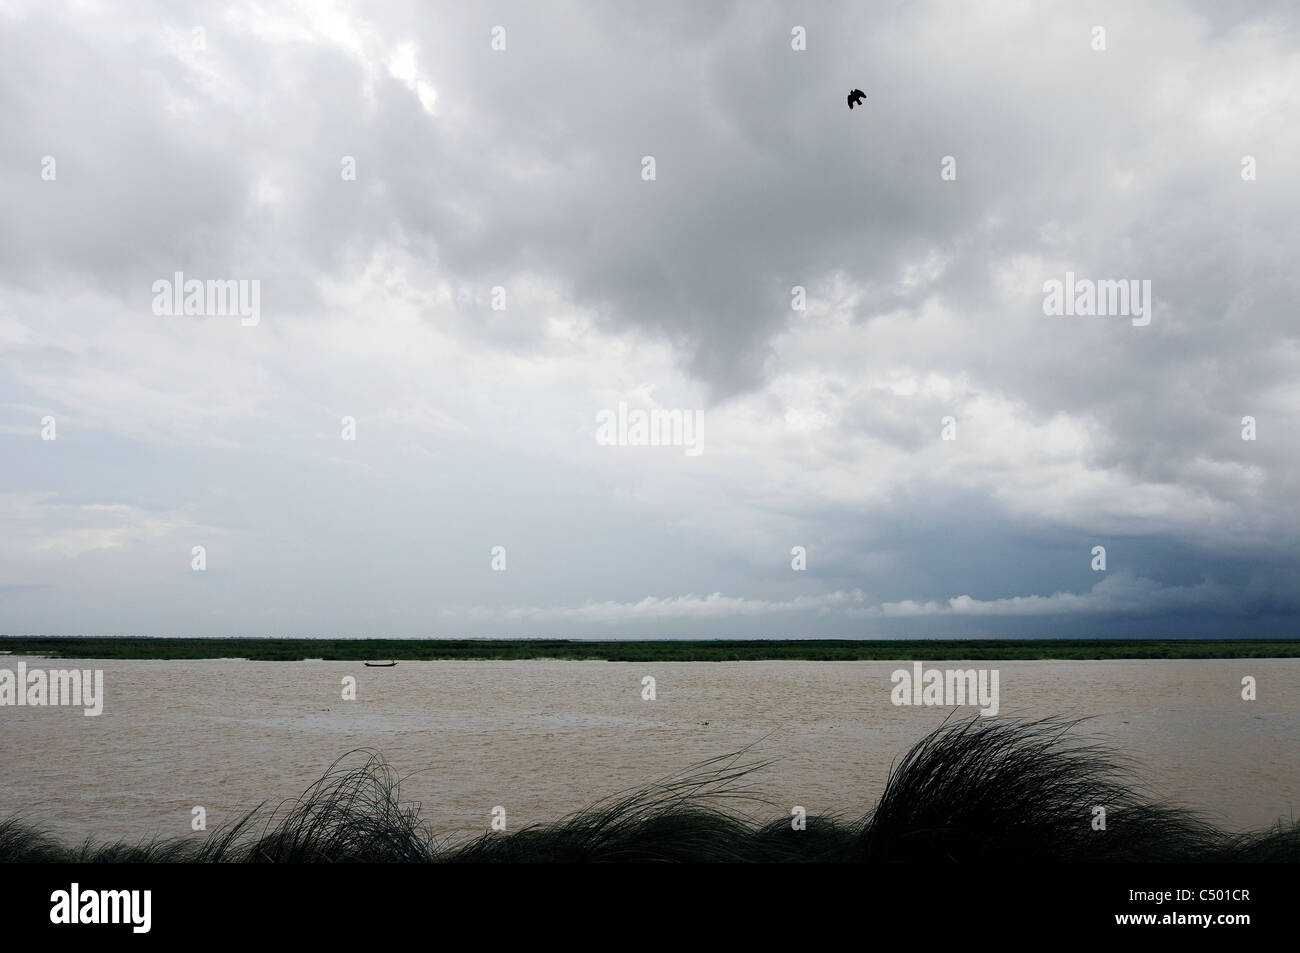 Near the Ganges (Padma) River in Bangladesh Stock Photo